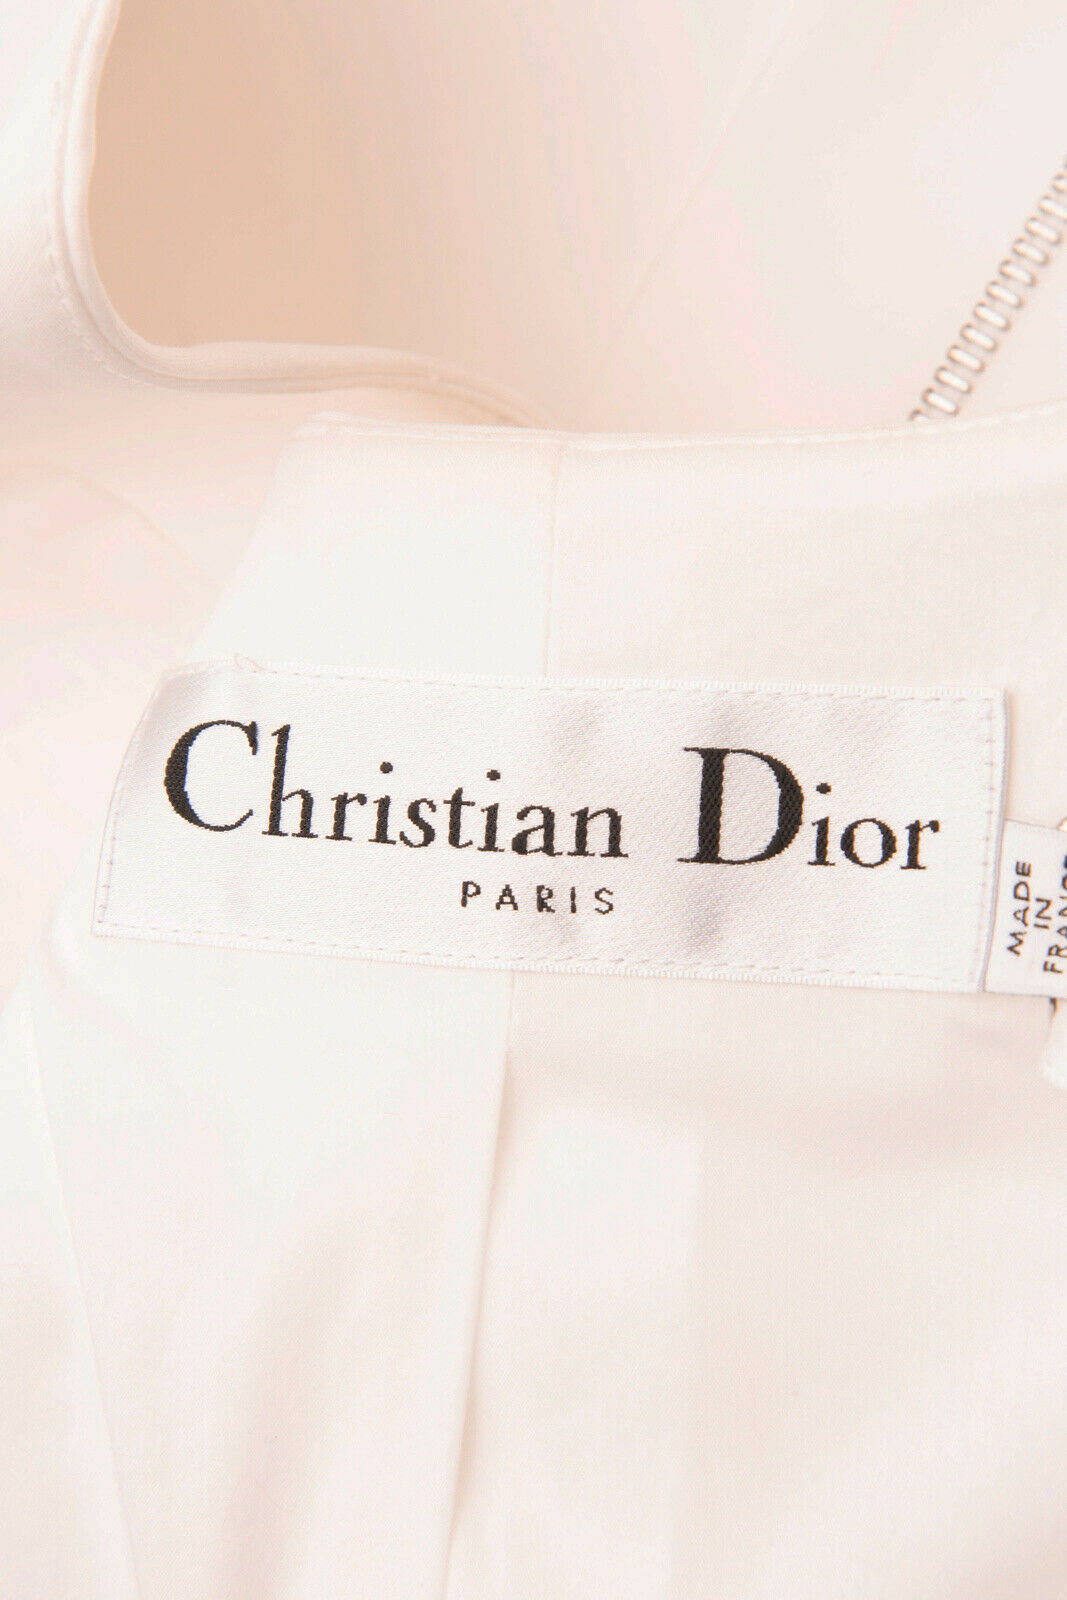 CHRISTIAN DIOR Gilet Size 38 Made in France